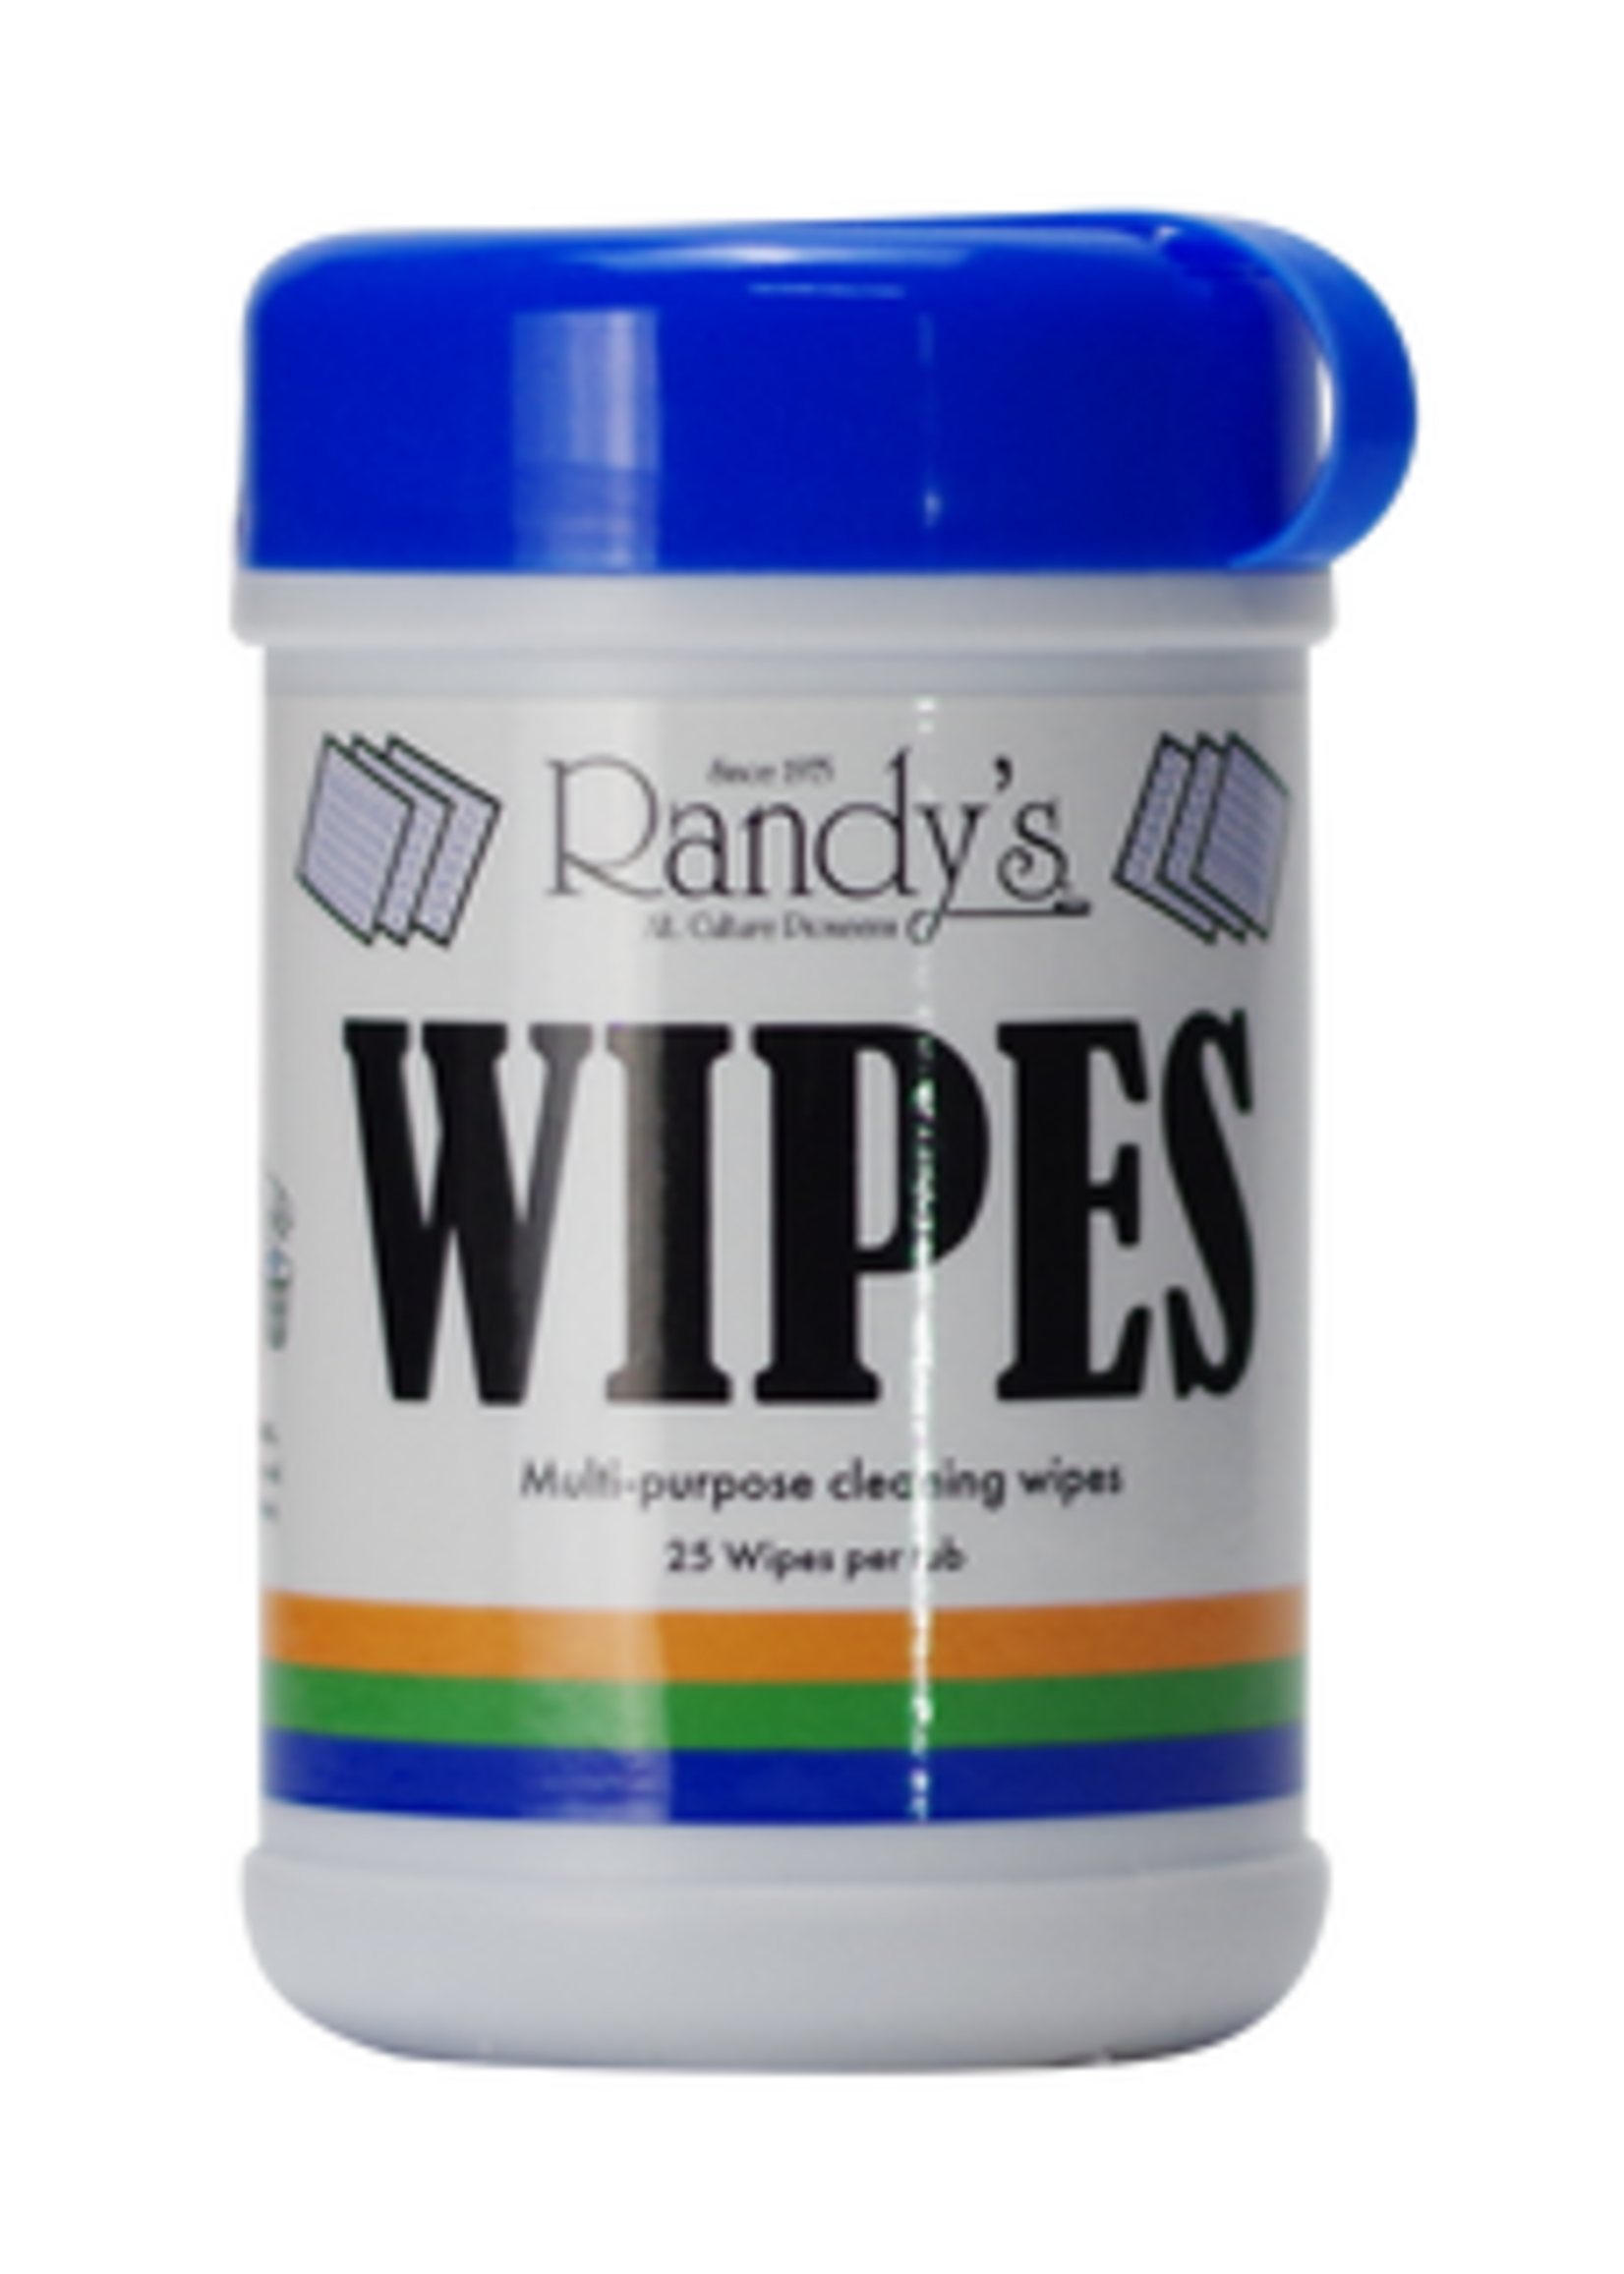 Randy's Randy's Multipurpose Cleaning Wipes